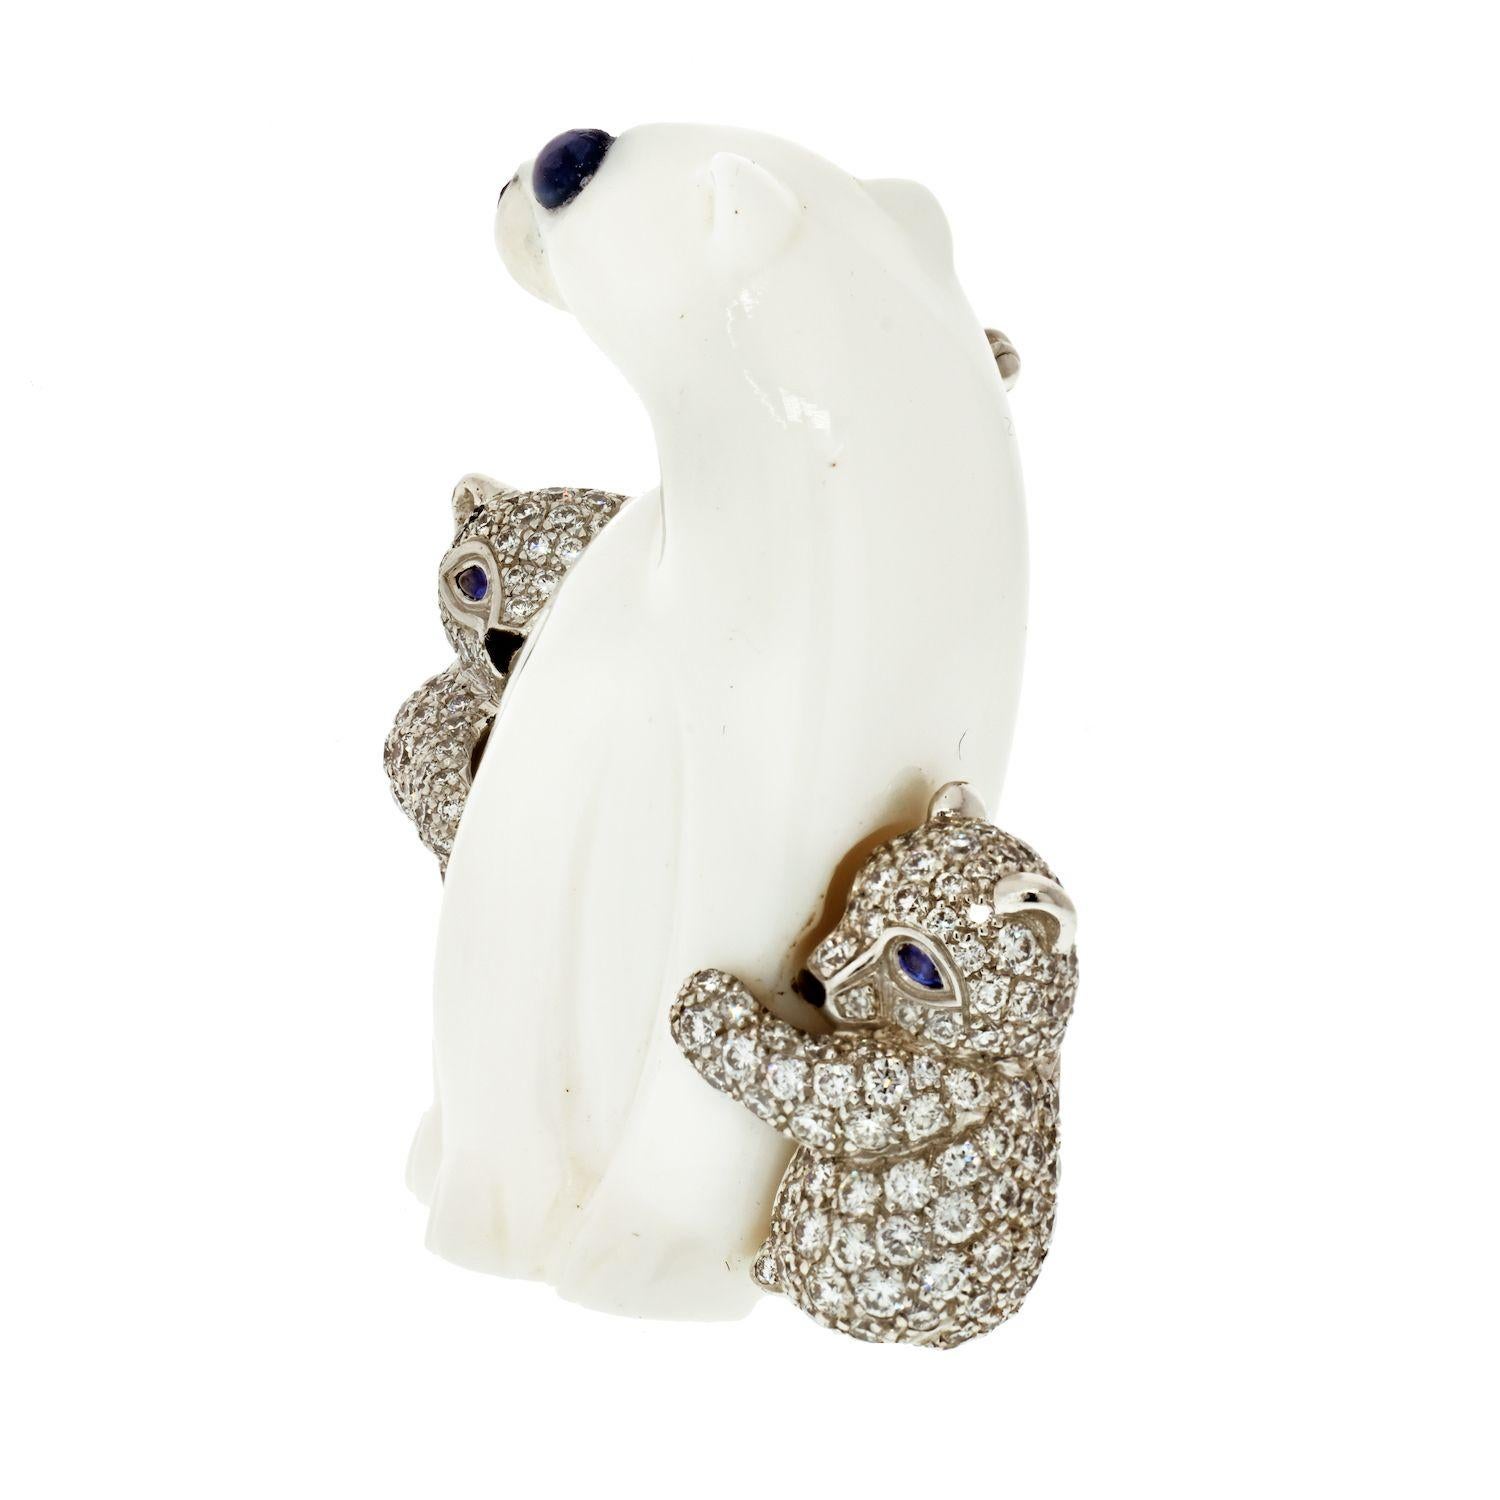 Tiffany White Chalcedony Polar Bear and Diamond Cubs with Sapphire and Black Enamel in 18K White Gold Brooch.
Length: 38mm
Width: 34mm at it's widest. Good. Polar bear has some damage to the chalcedony. Not obvious.
